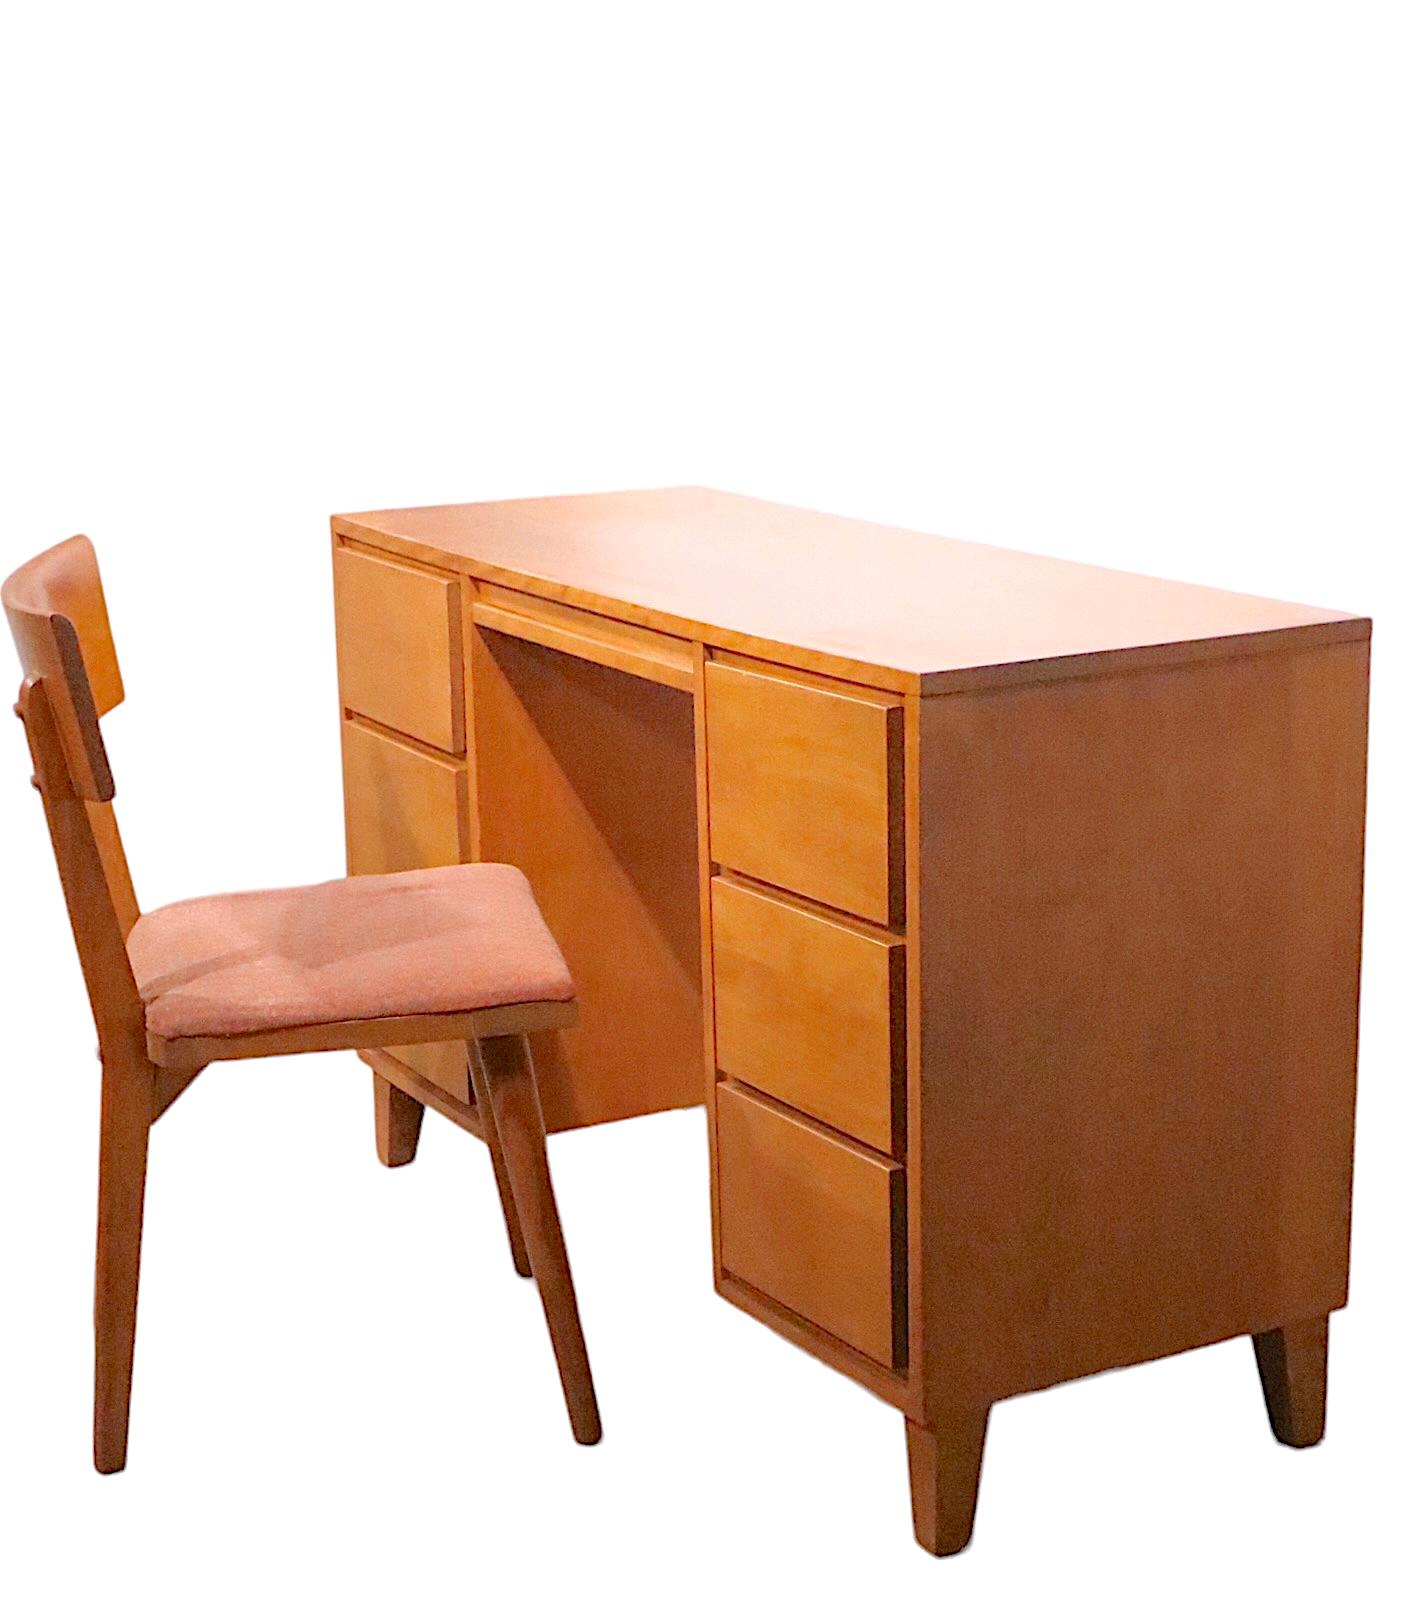 1950's Mid Century Desk and Chair Conant Ball  Modern Mates by Leslie Diamond   For Sale 3